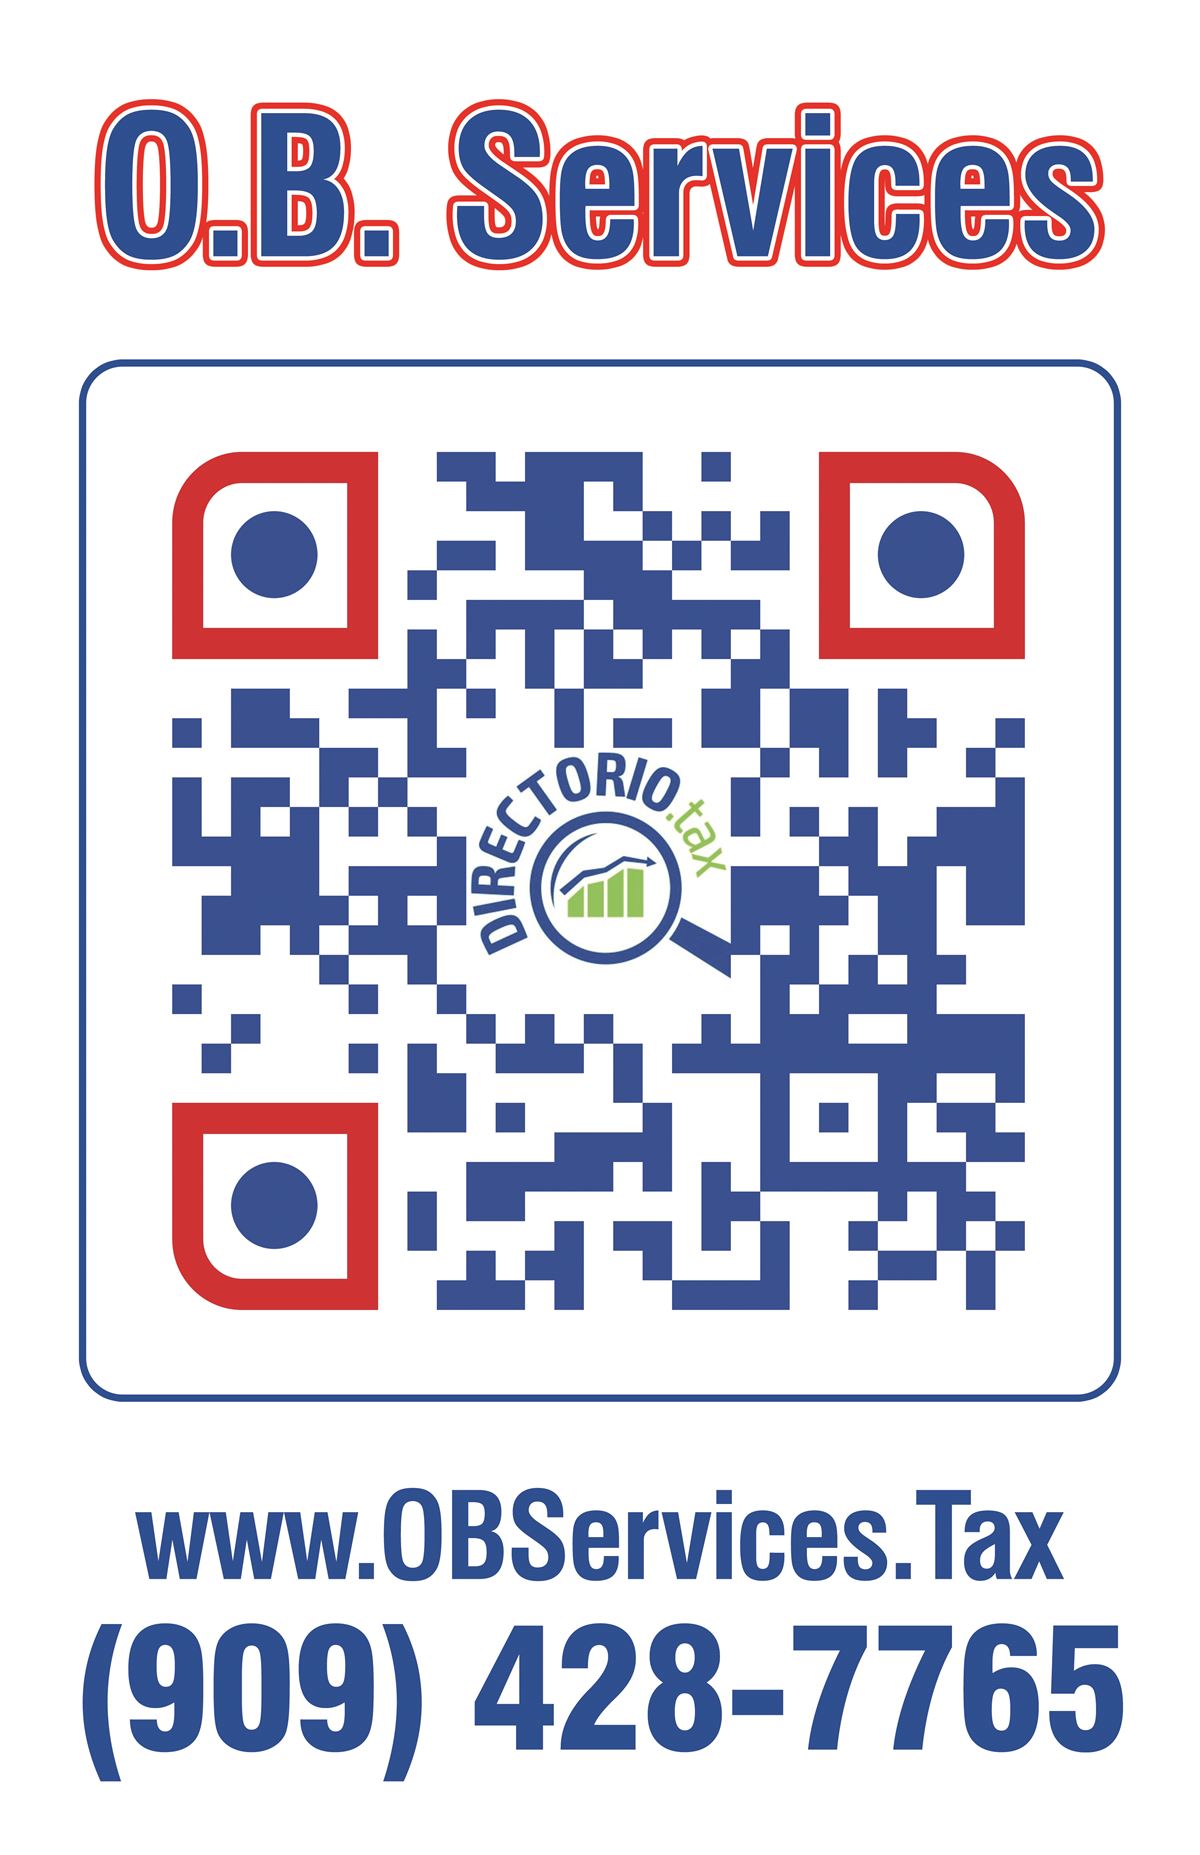 OBServices.tax